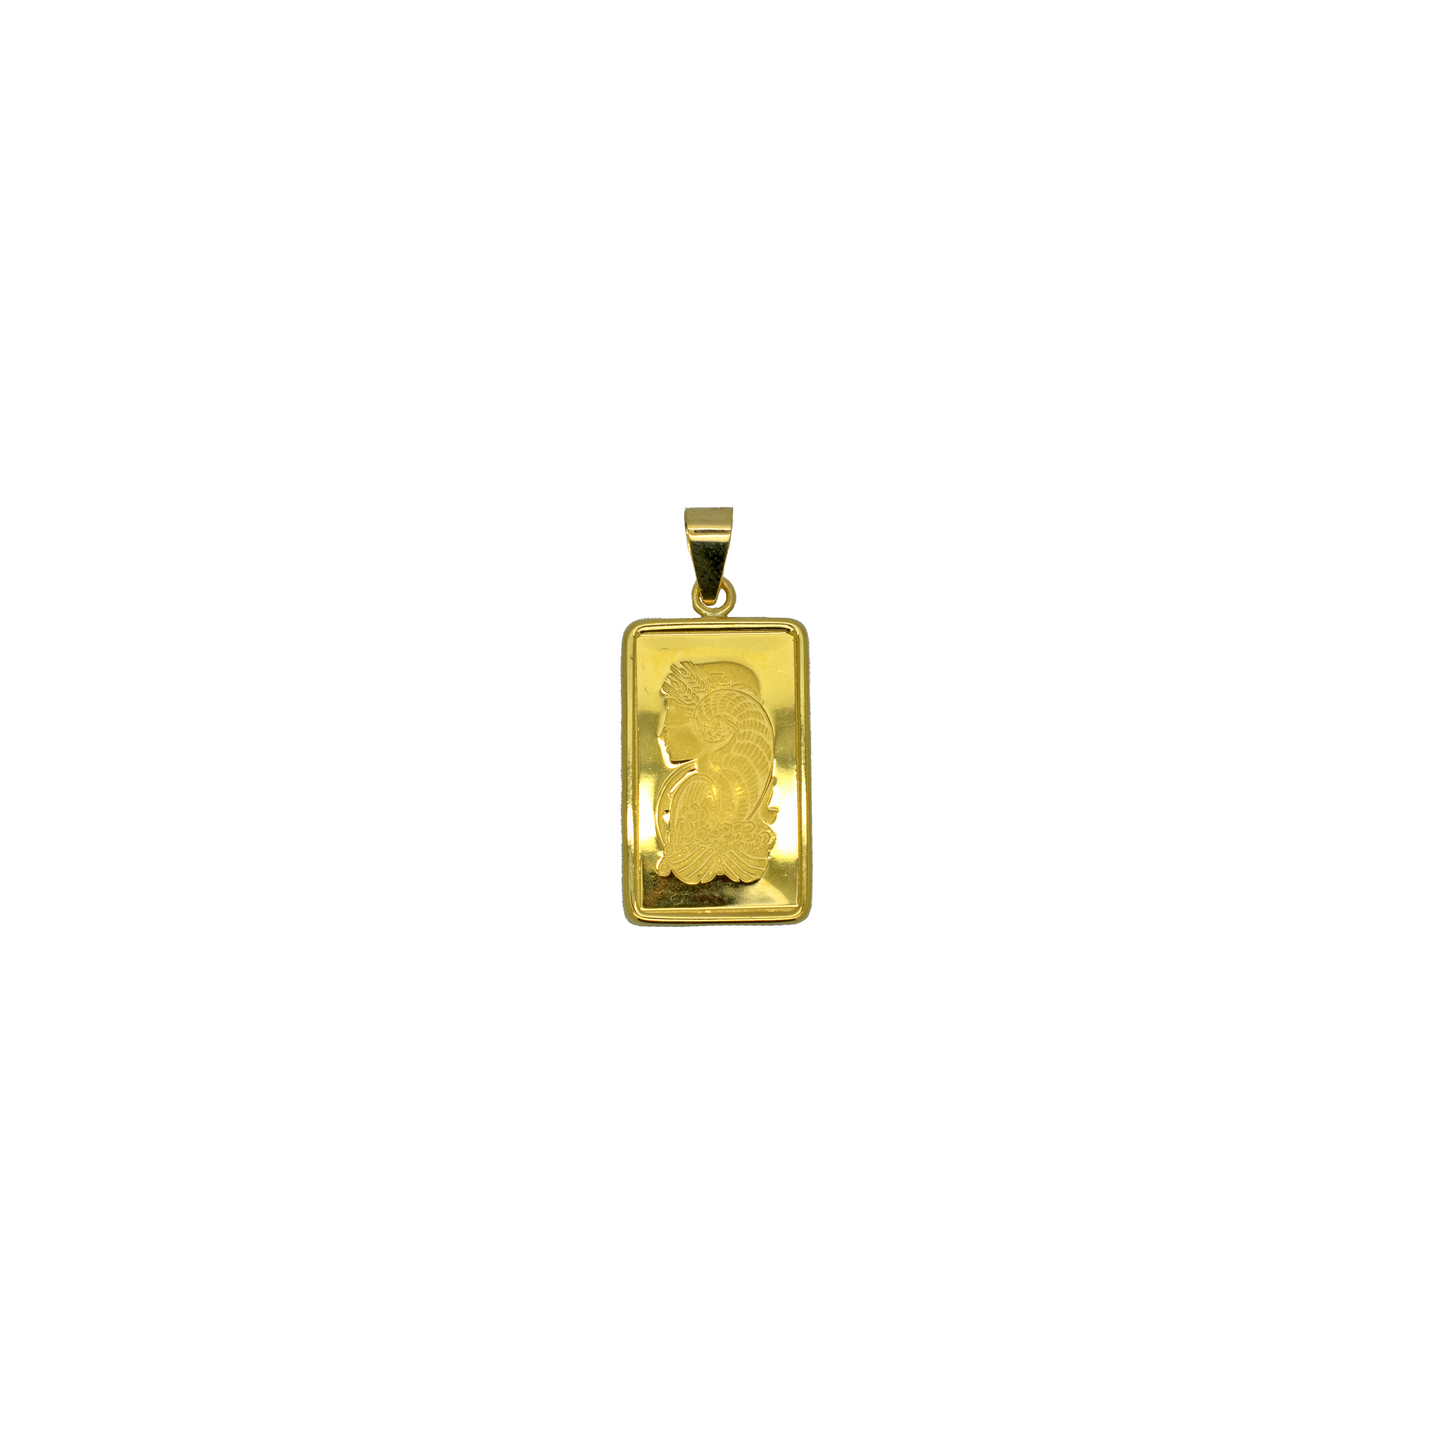 24k Gold Pamp 2.5g with 14k Border